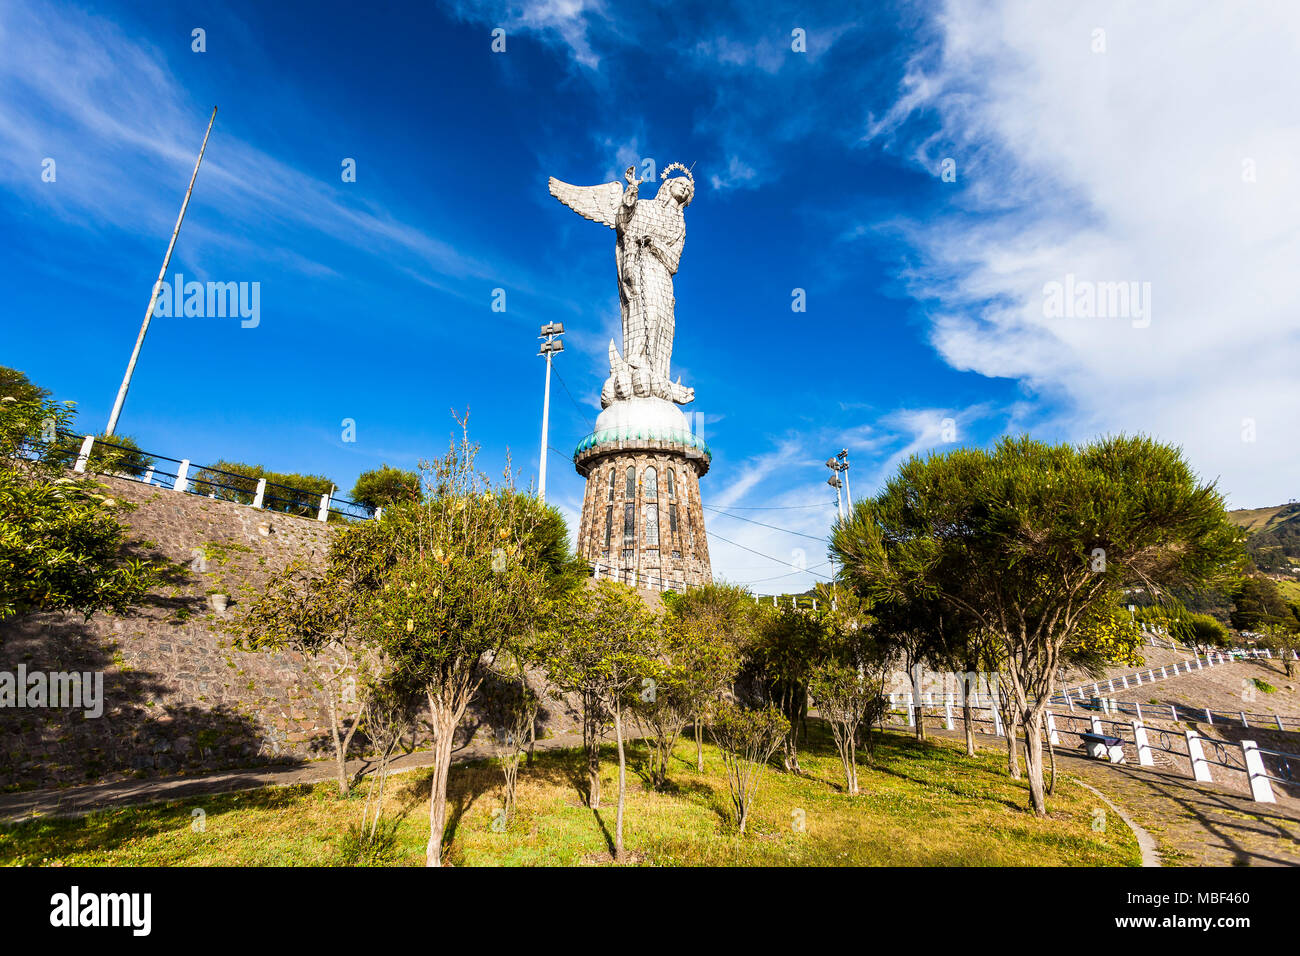 QUITO, ECUADOR - JUNE 14, 2015: The monument of the Virgen del Panecillo looks magnificent in the morning on top of the small hill in the center of th Stock Photo